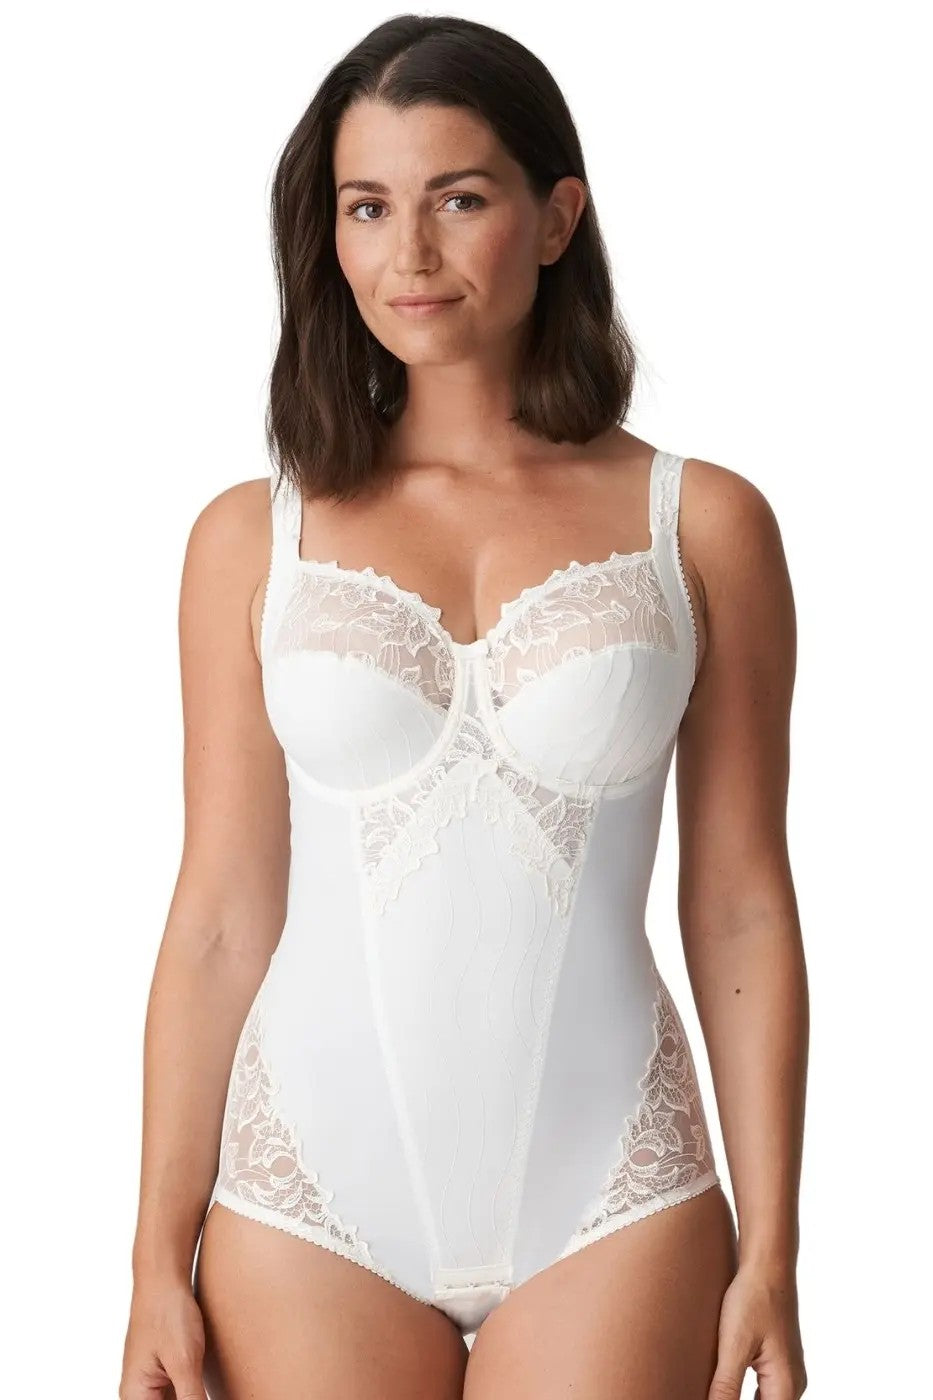 PRIMA DONNA SAMBAL SOFTCUP BODY SUIT – Tops & Bottoms